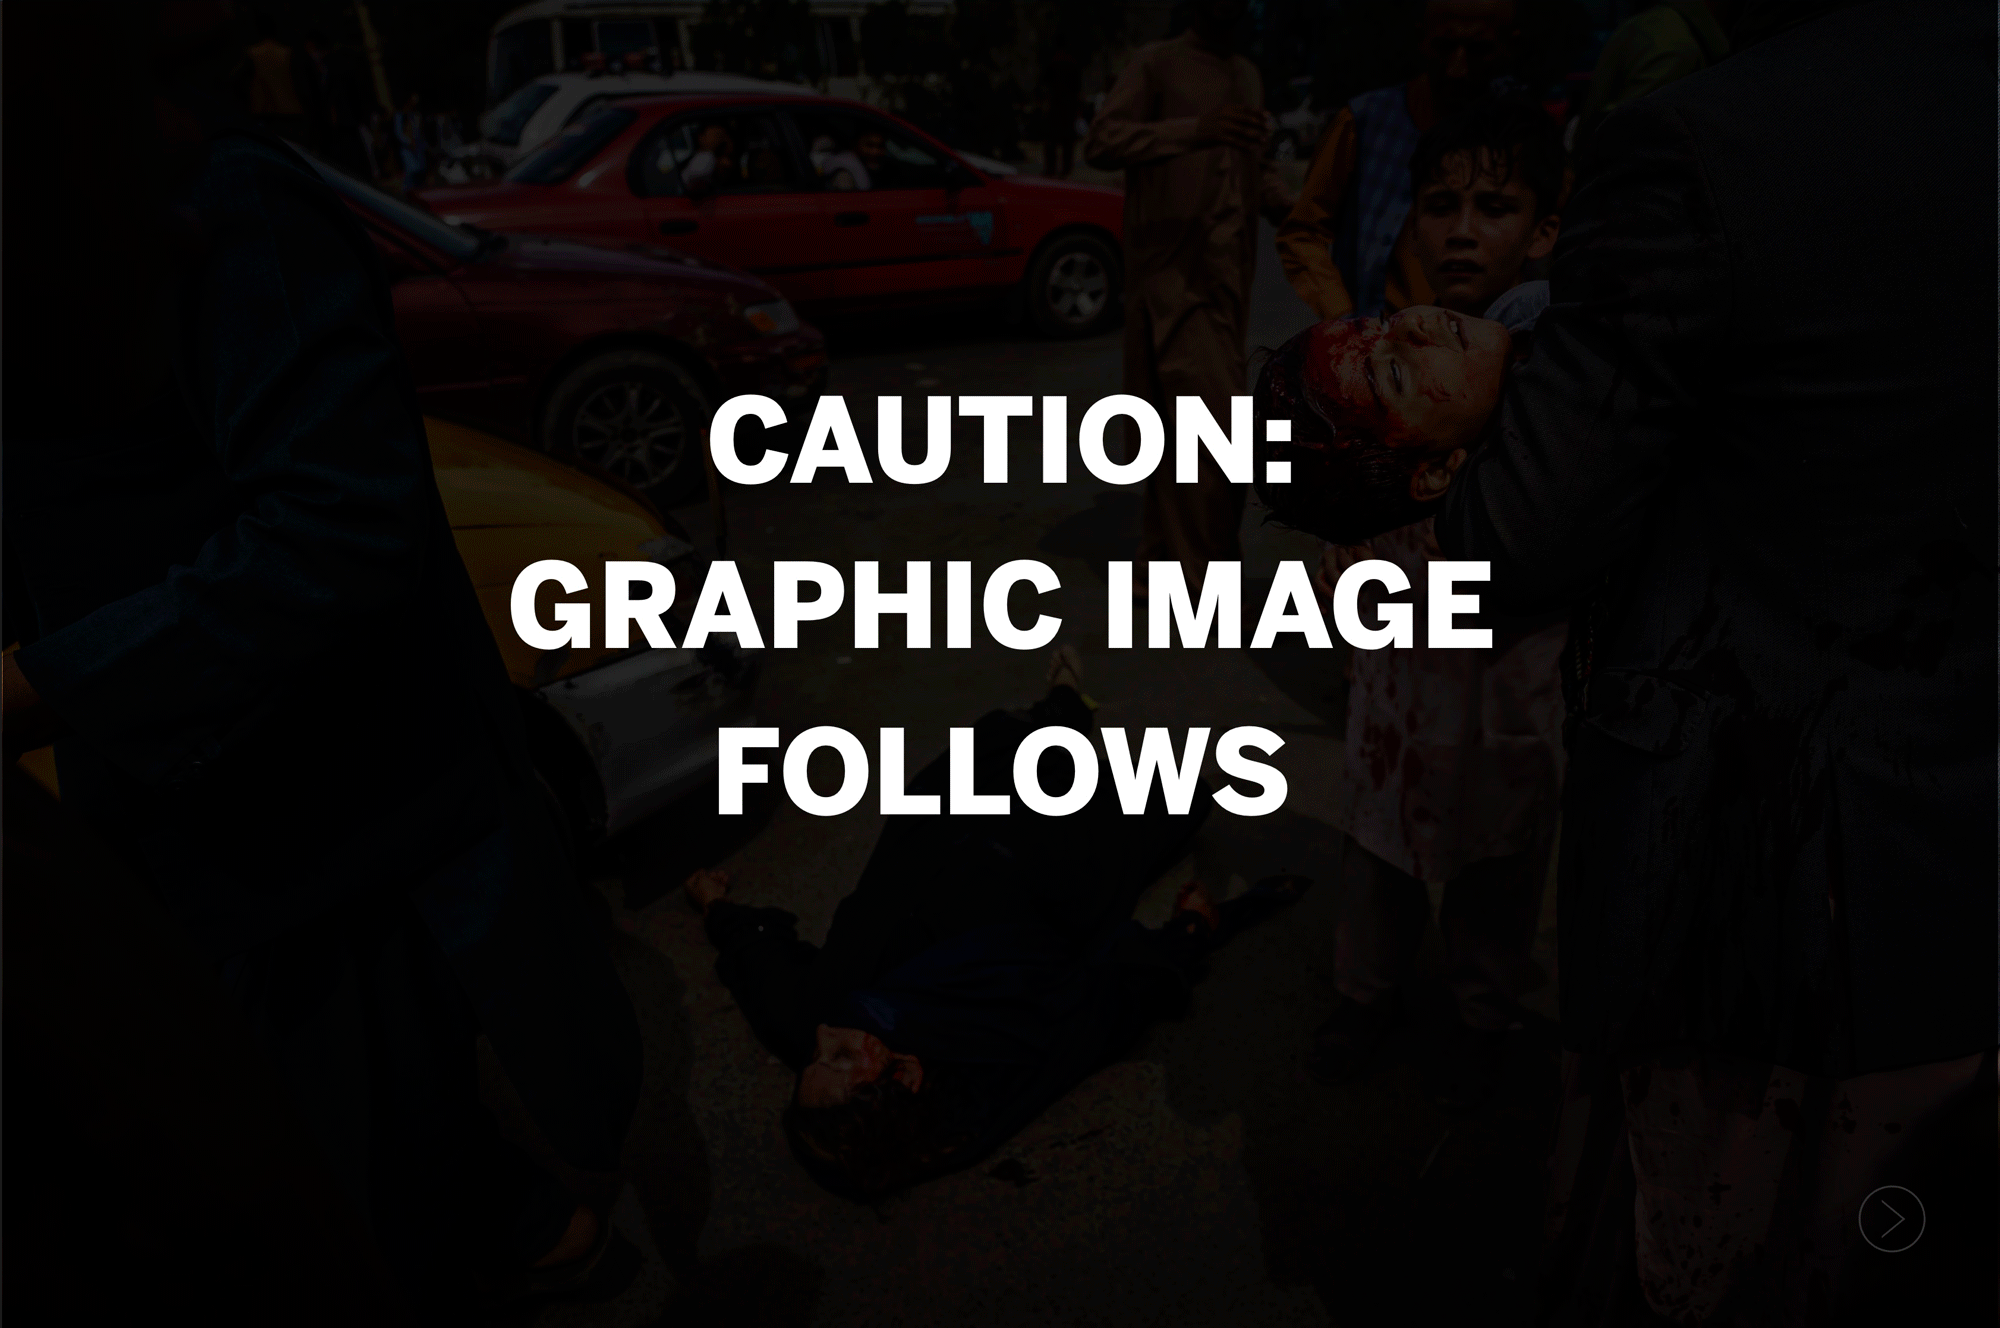 Aug. 17: A man carries a bloodied child while a bloodied woman lies on the street